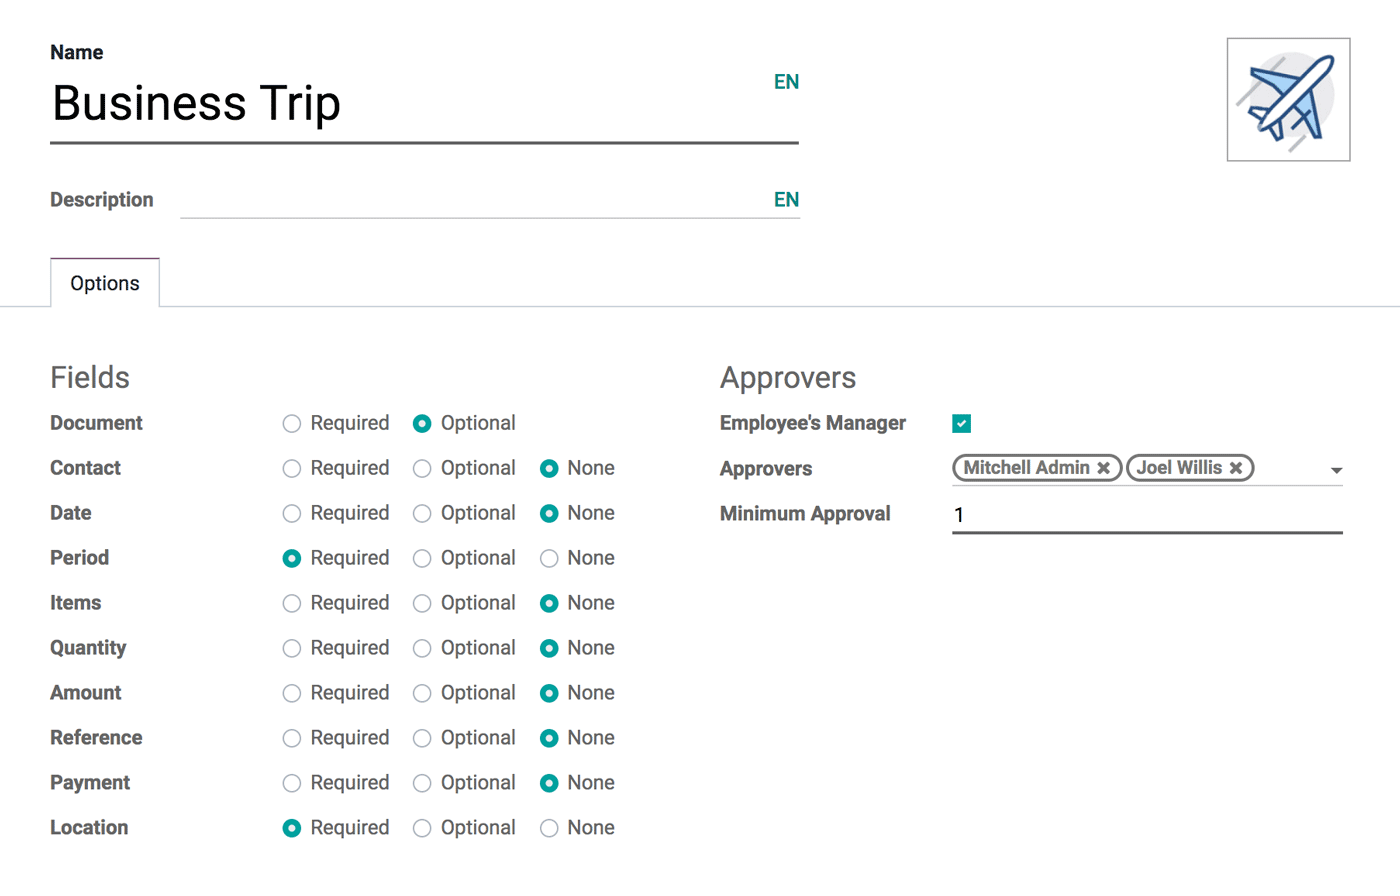 Closeup of the interface for setting up a Business Trip type of request